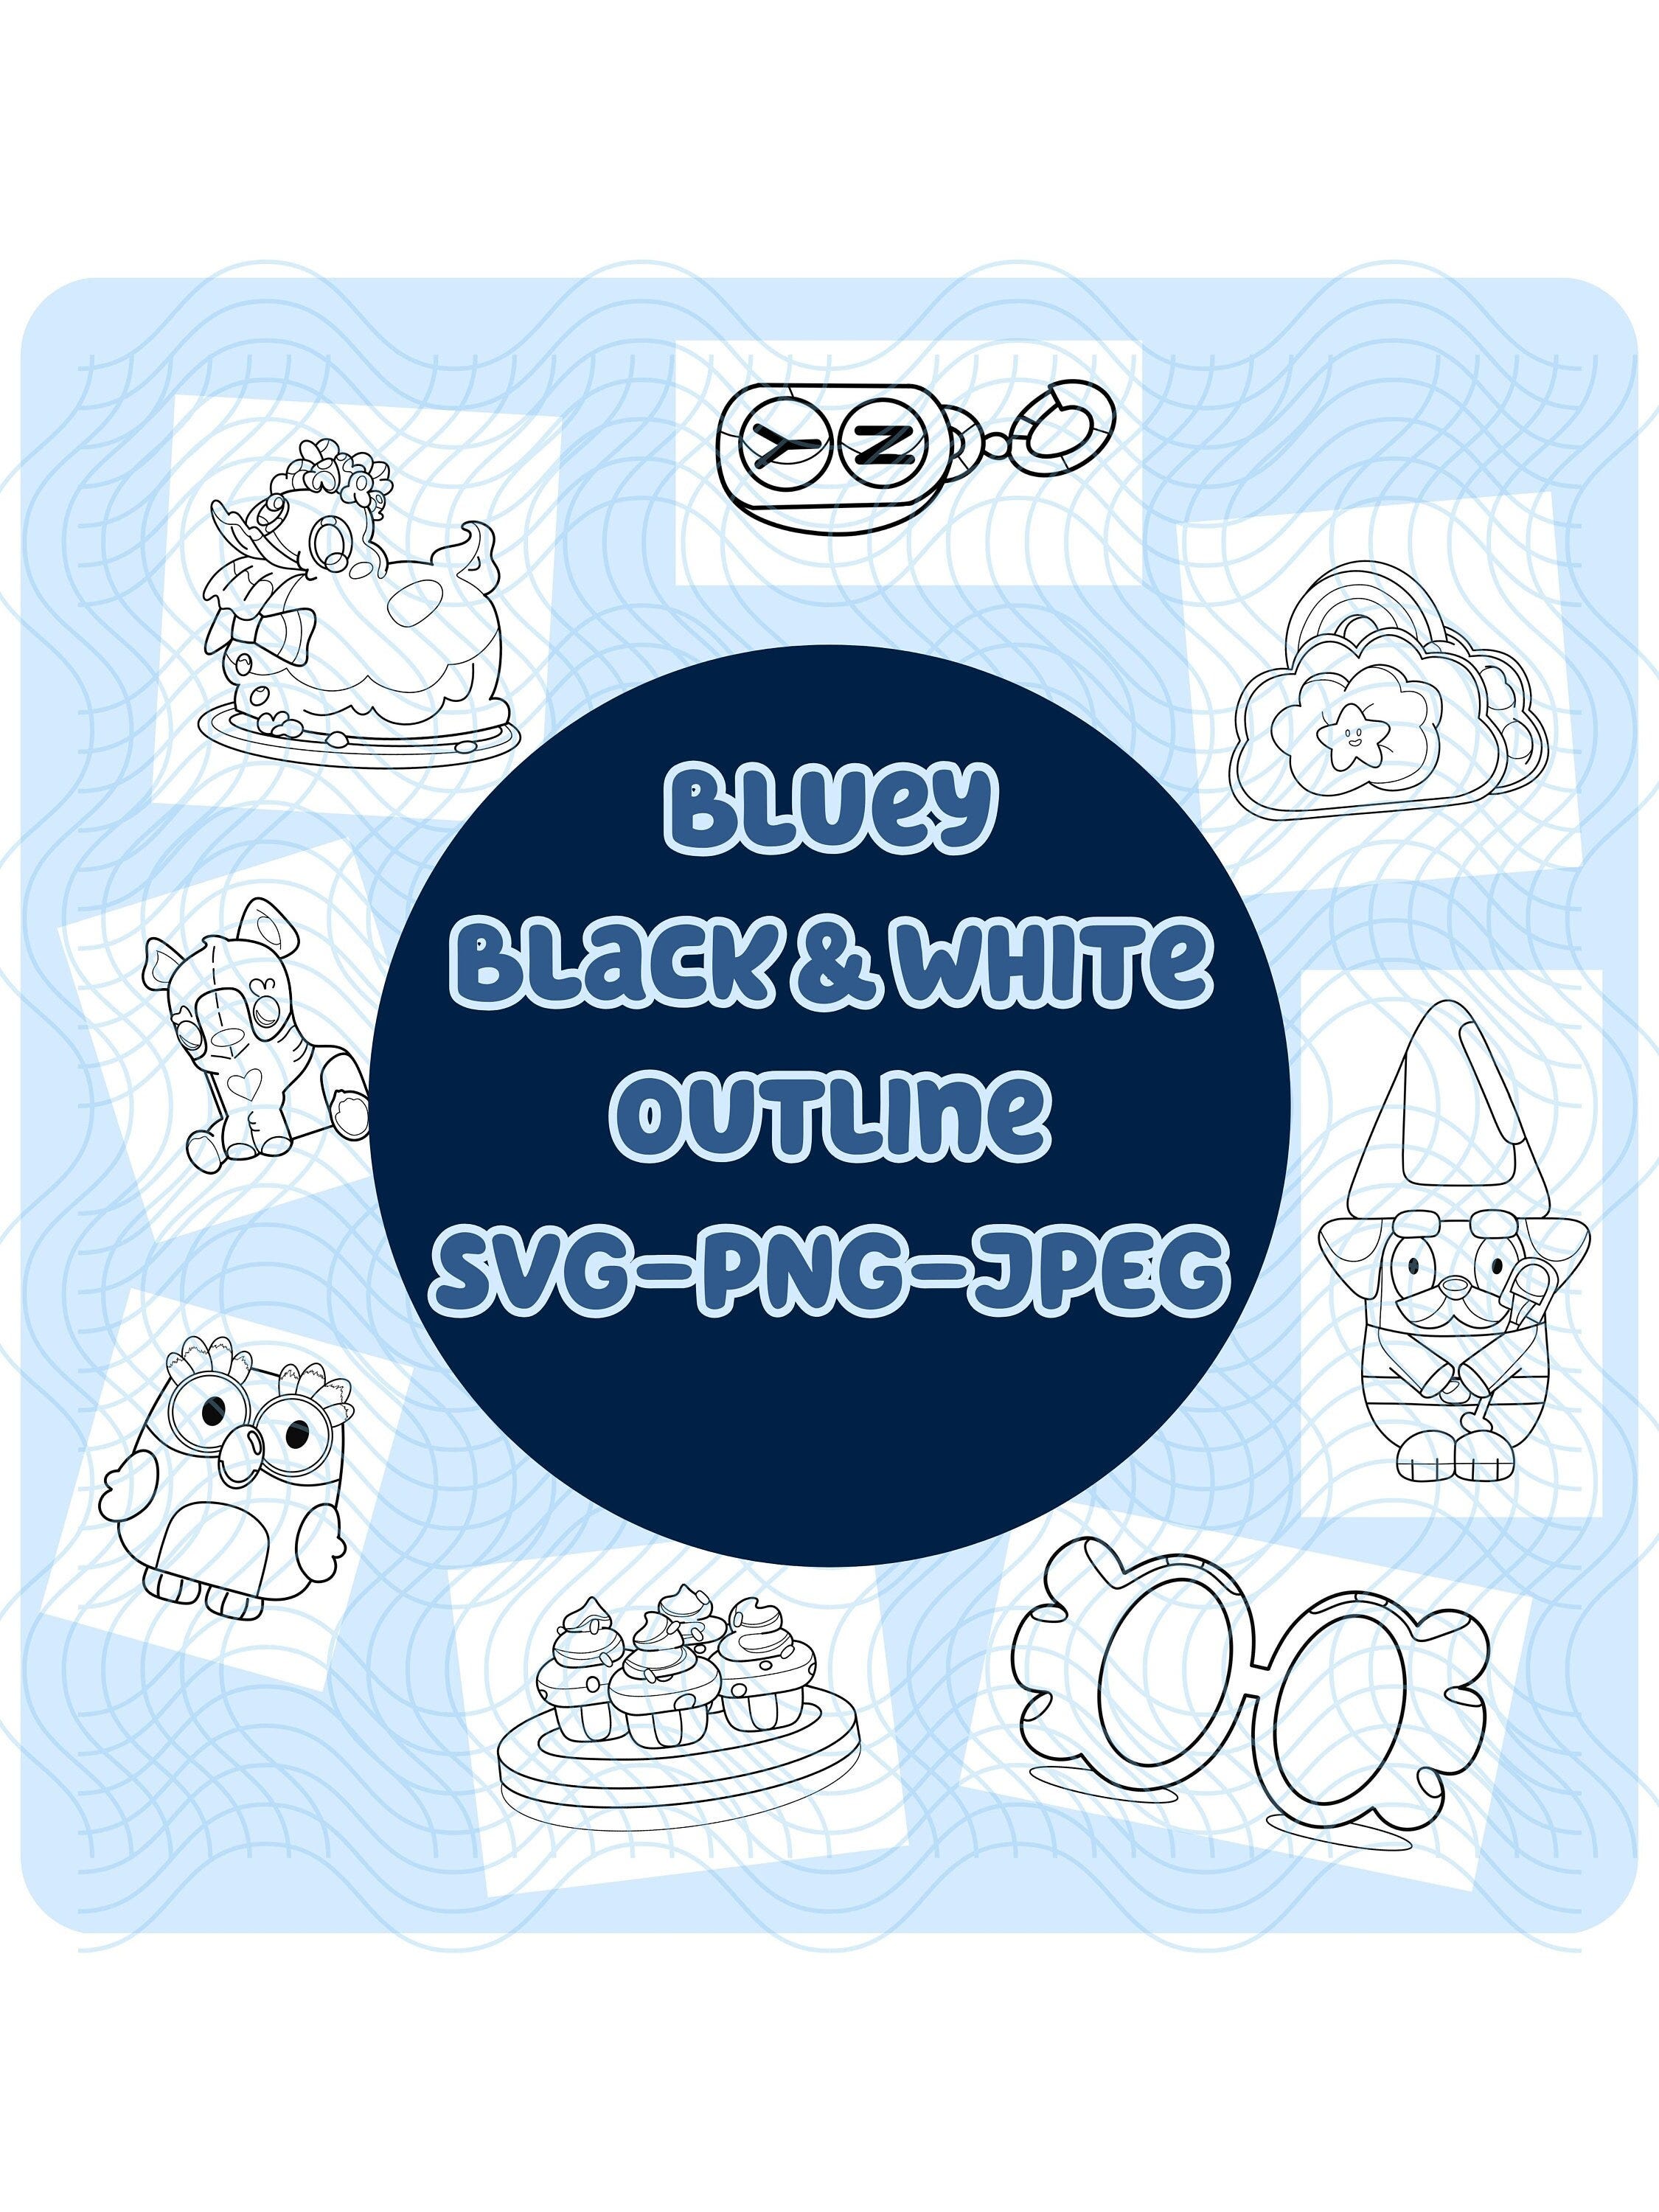 Bluey Black & White Outline SVG-PNG-JPEG - Bluey Icons and Toys- Bluey Svg Cricut Bundle- Birthday Party Favors- Goody Bag Materials- Gifts